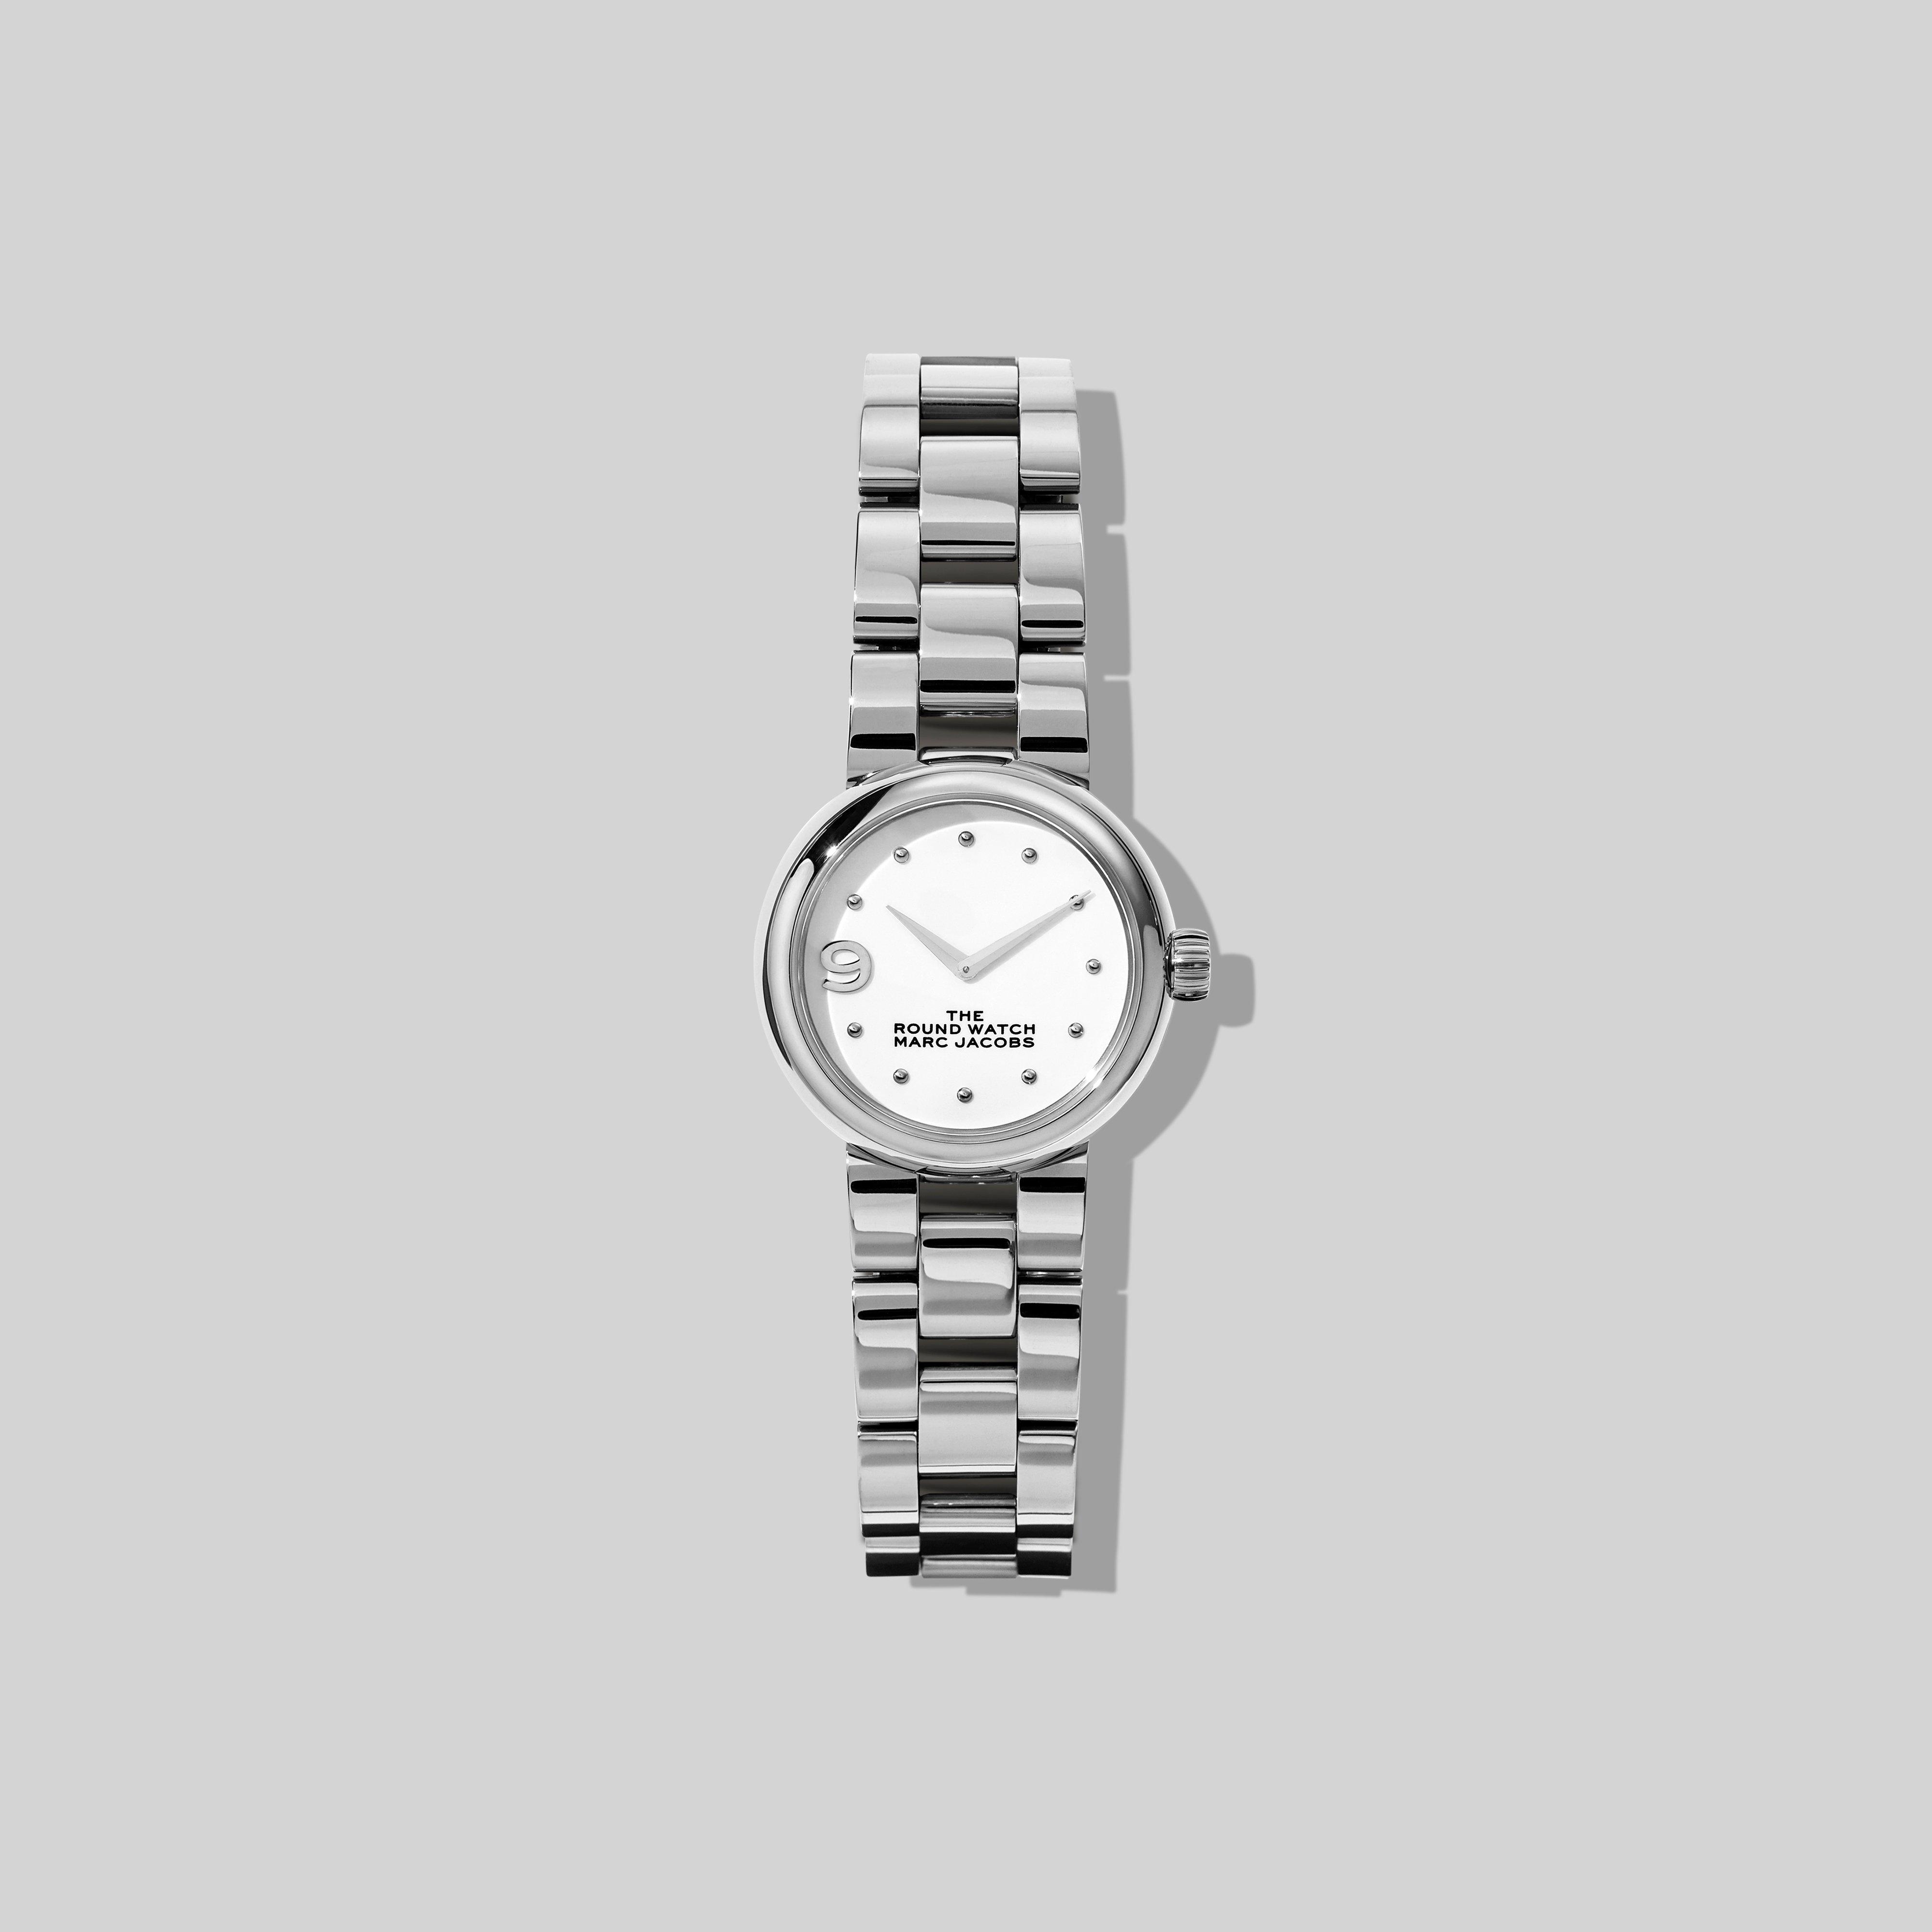 The Round Watch In Silver